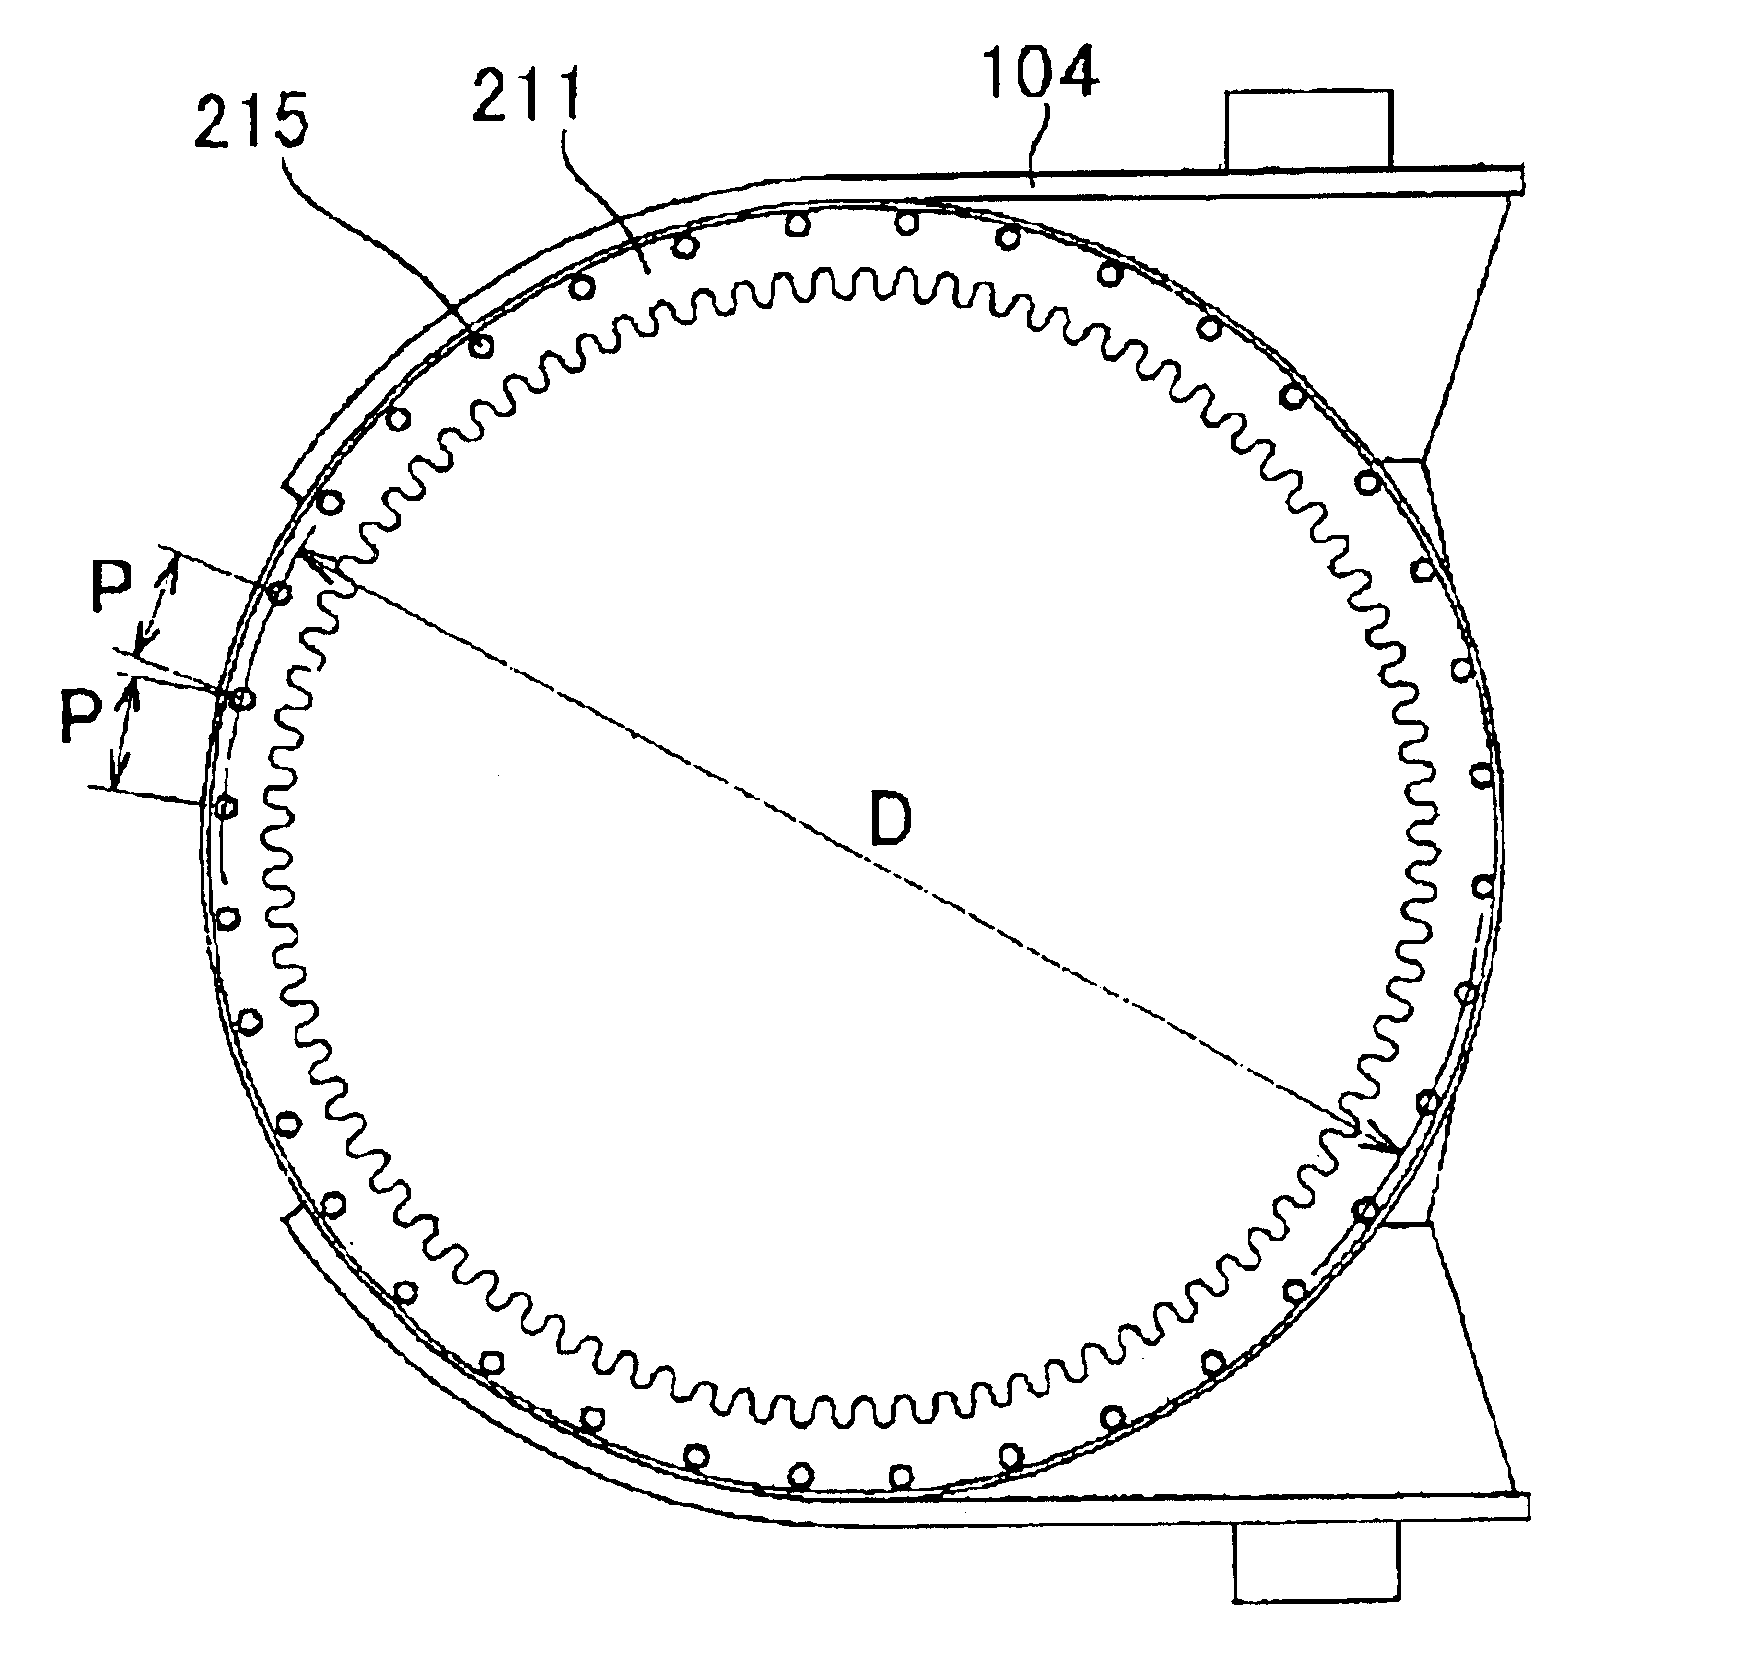 Circle structure of motor grader